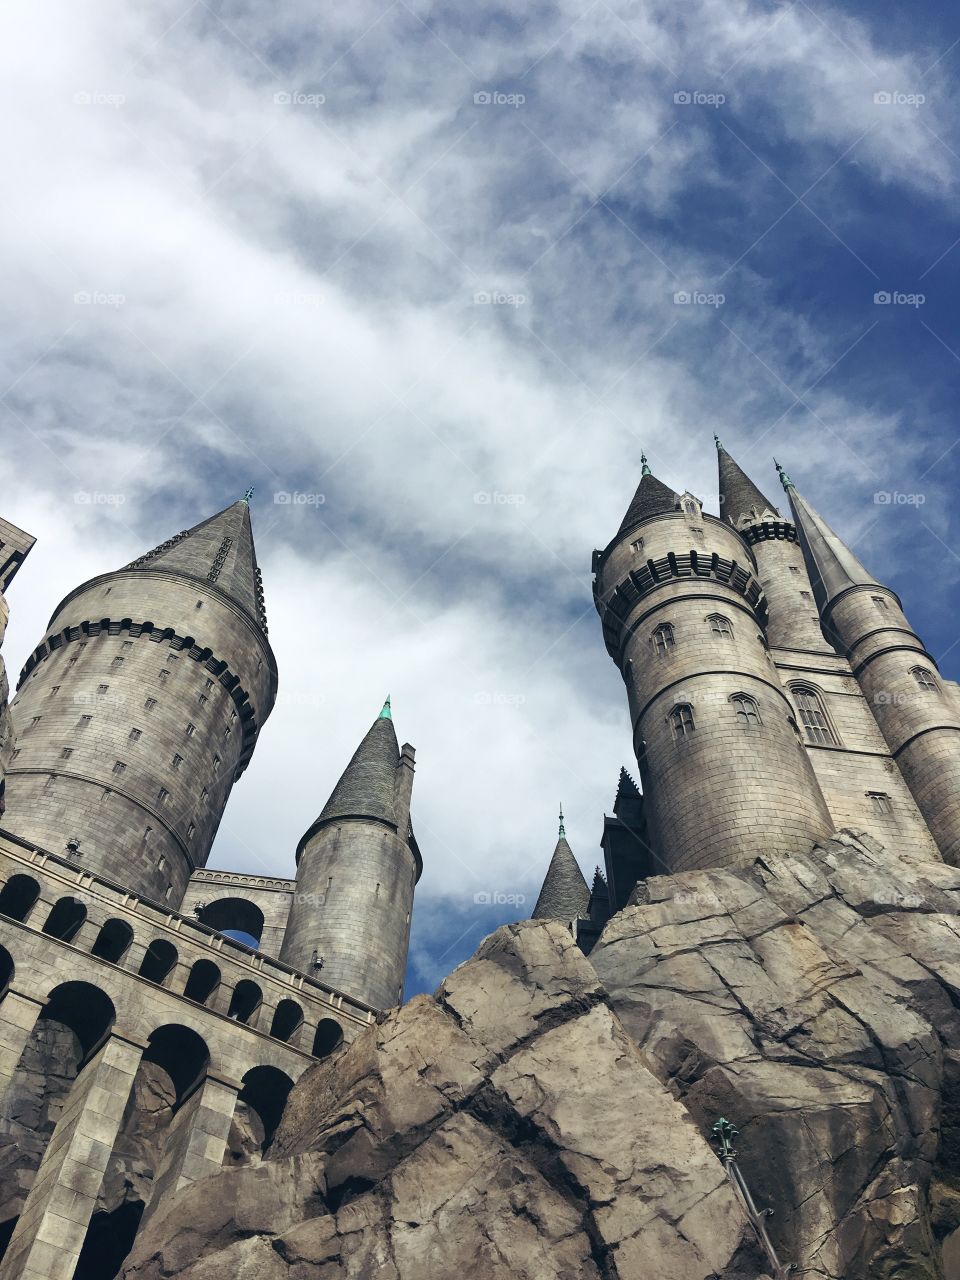 Hog warts castle at Wizarding World of Harry Potter in Universal Studios Hollywood